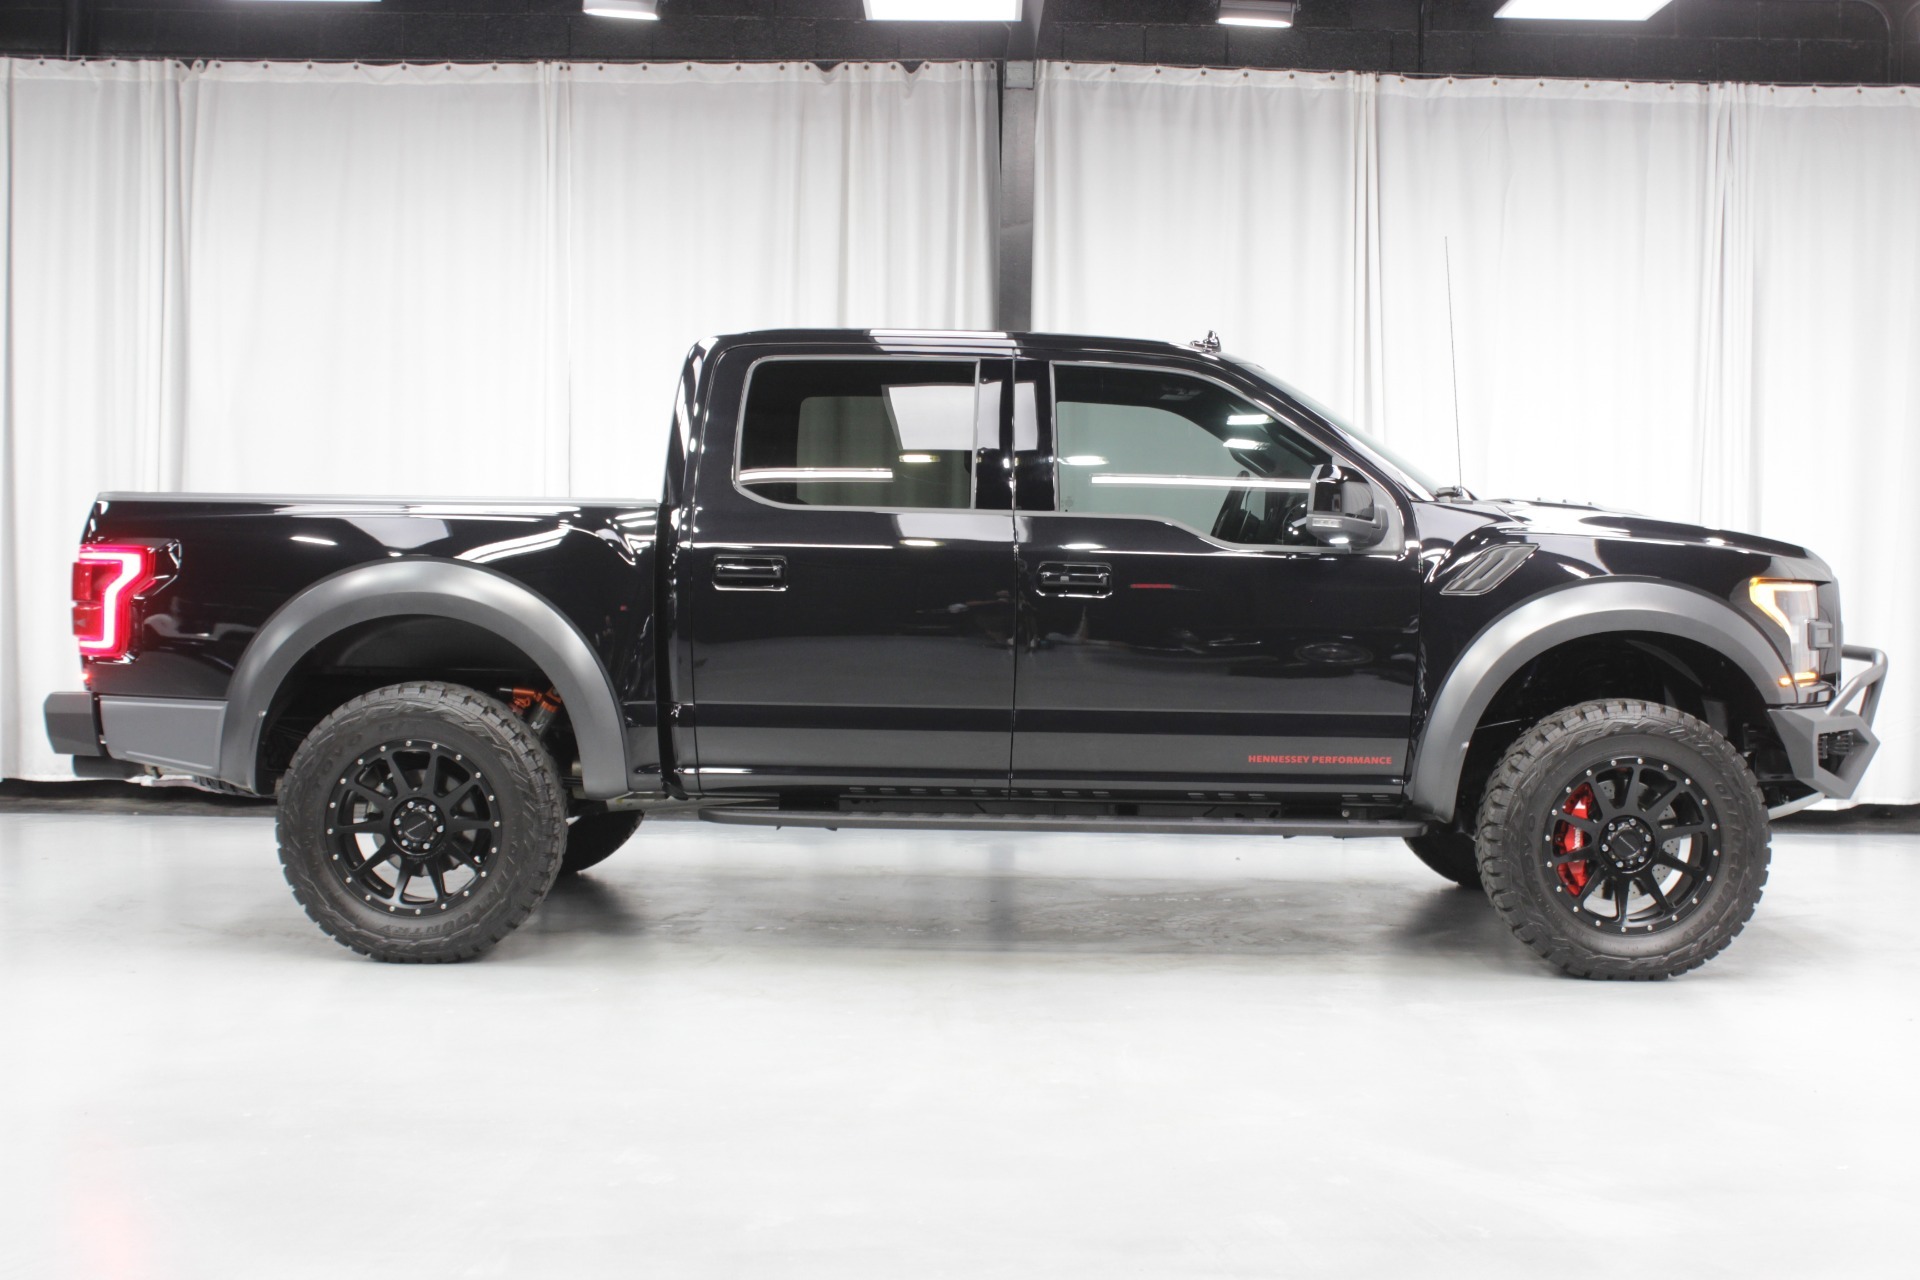 Used 2019 Ford F-150 RAPTOR 4x4 HENNESSY VELOCIRAPTOR VR600 UPGRADE (600HP) for sale Sold at Formula Imports in Charlotte NC 28227 6